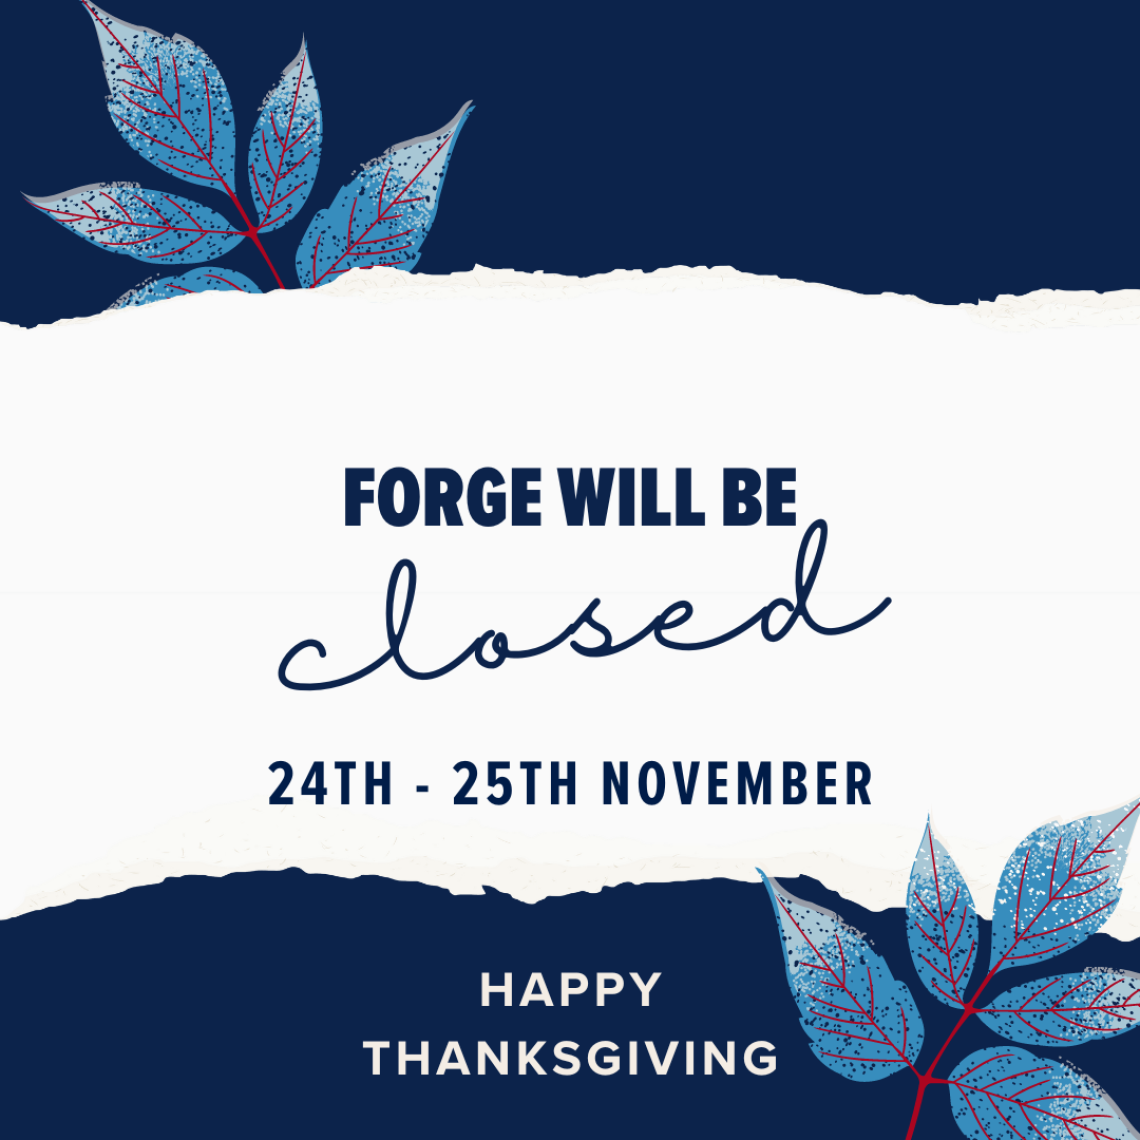 FORGE will be closed November 24th-25th, Happy thanksgiving